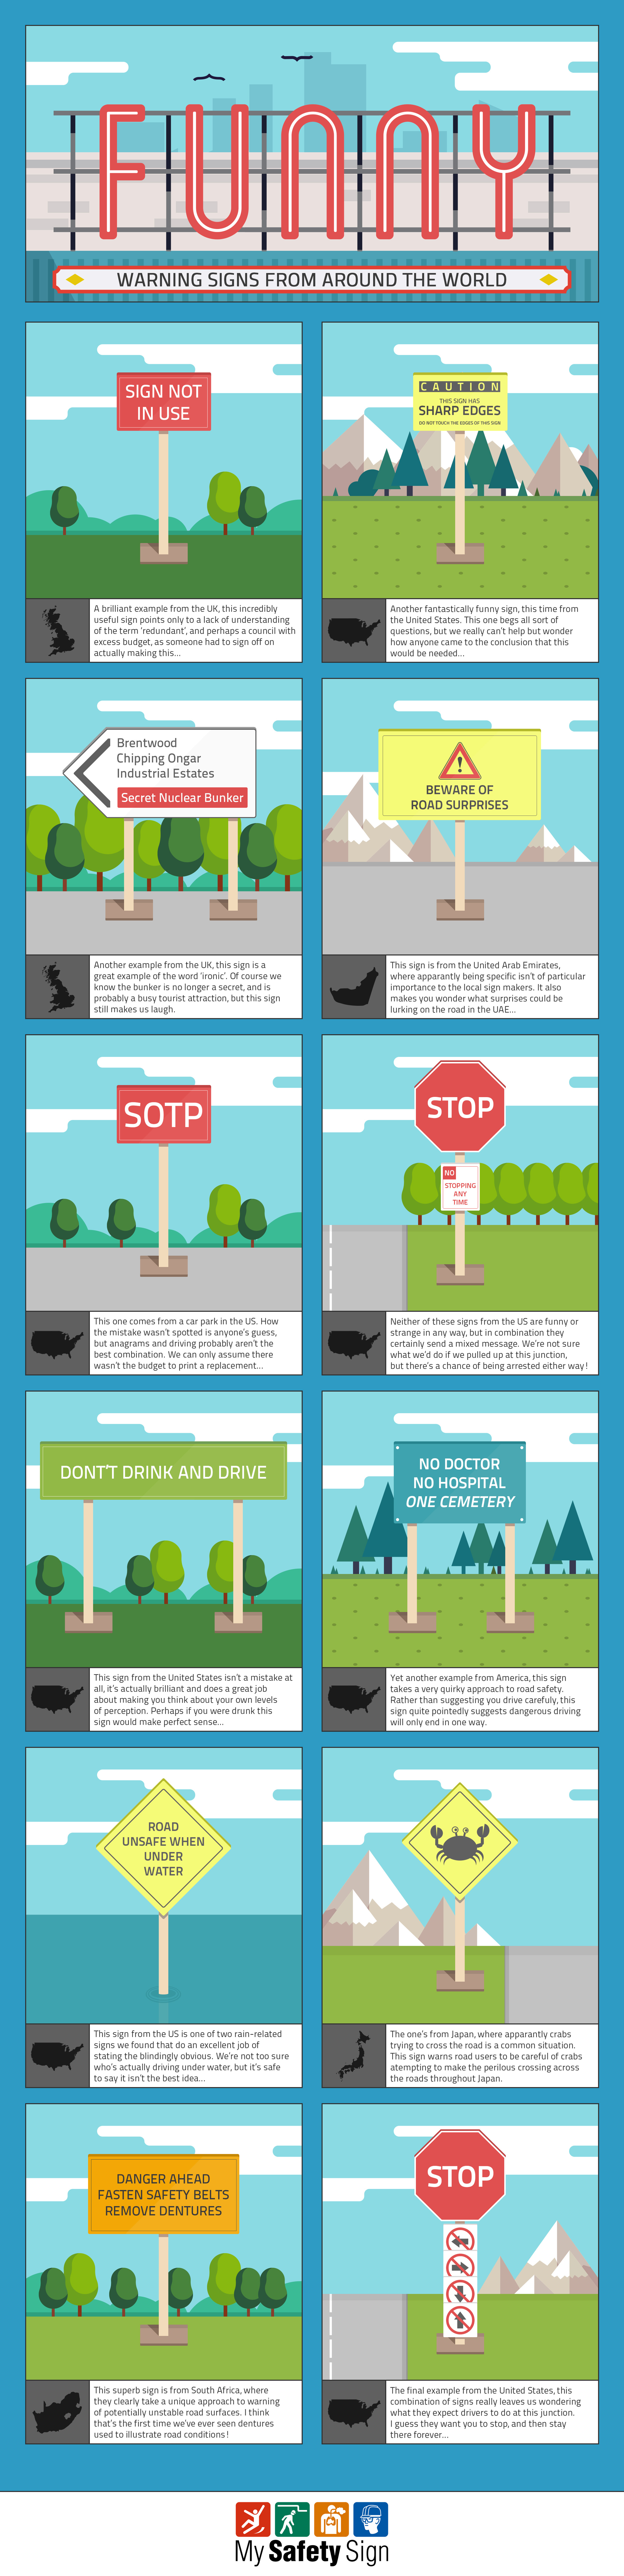 http://www.mysafetysign.com/img/src/funny-warning-and-safety-signs-infographic.jpg